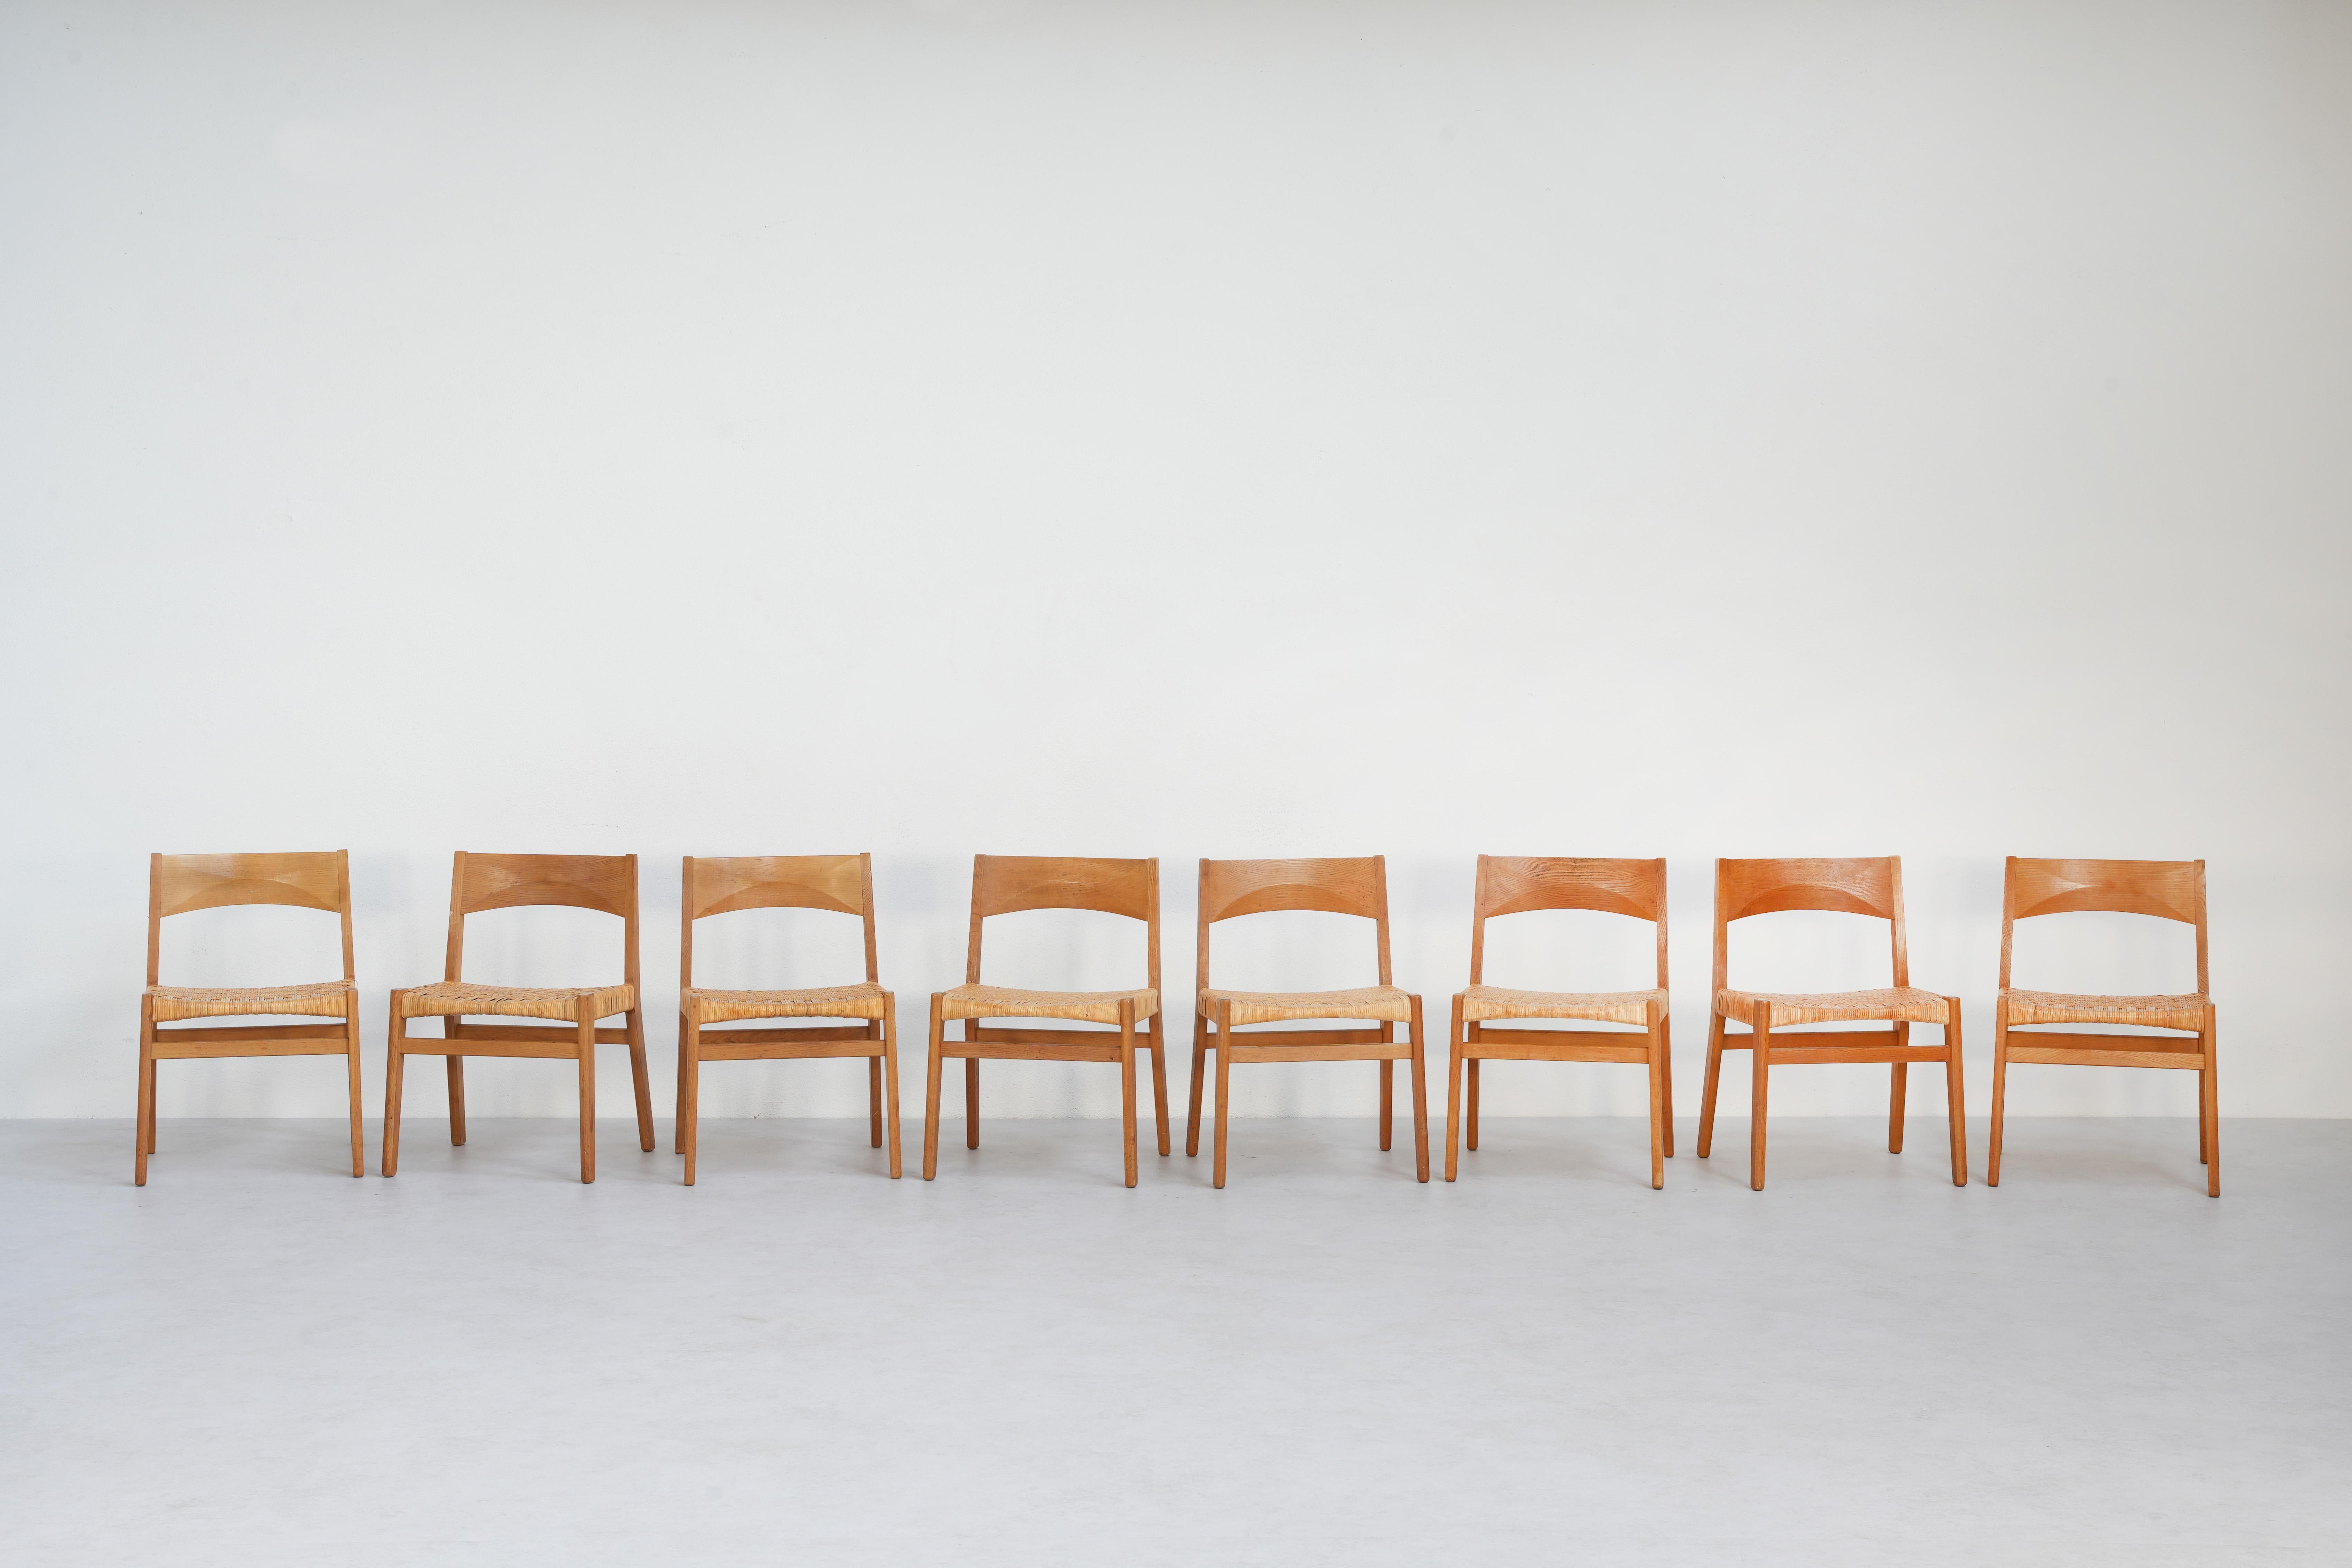 A beautiful set of eight dining chairs, designed by John Vedel Rieper and manufactured by Källemo, Denmark 1962.

These beautiful chairs come in a special version with a cane mesh in a herringbone weave. Together with the sophisticated wooden